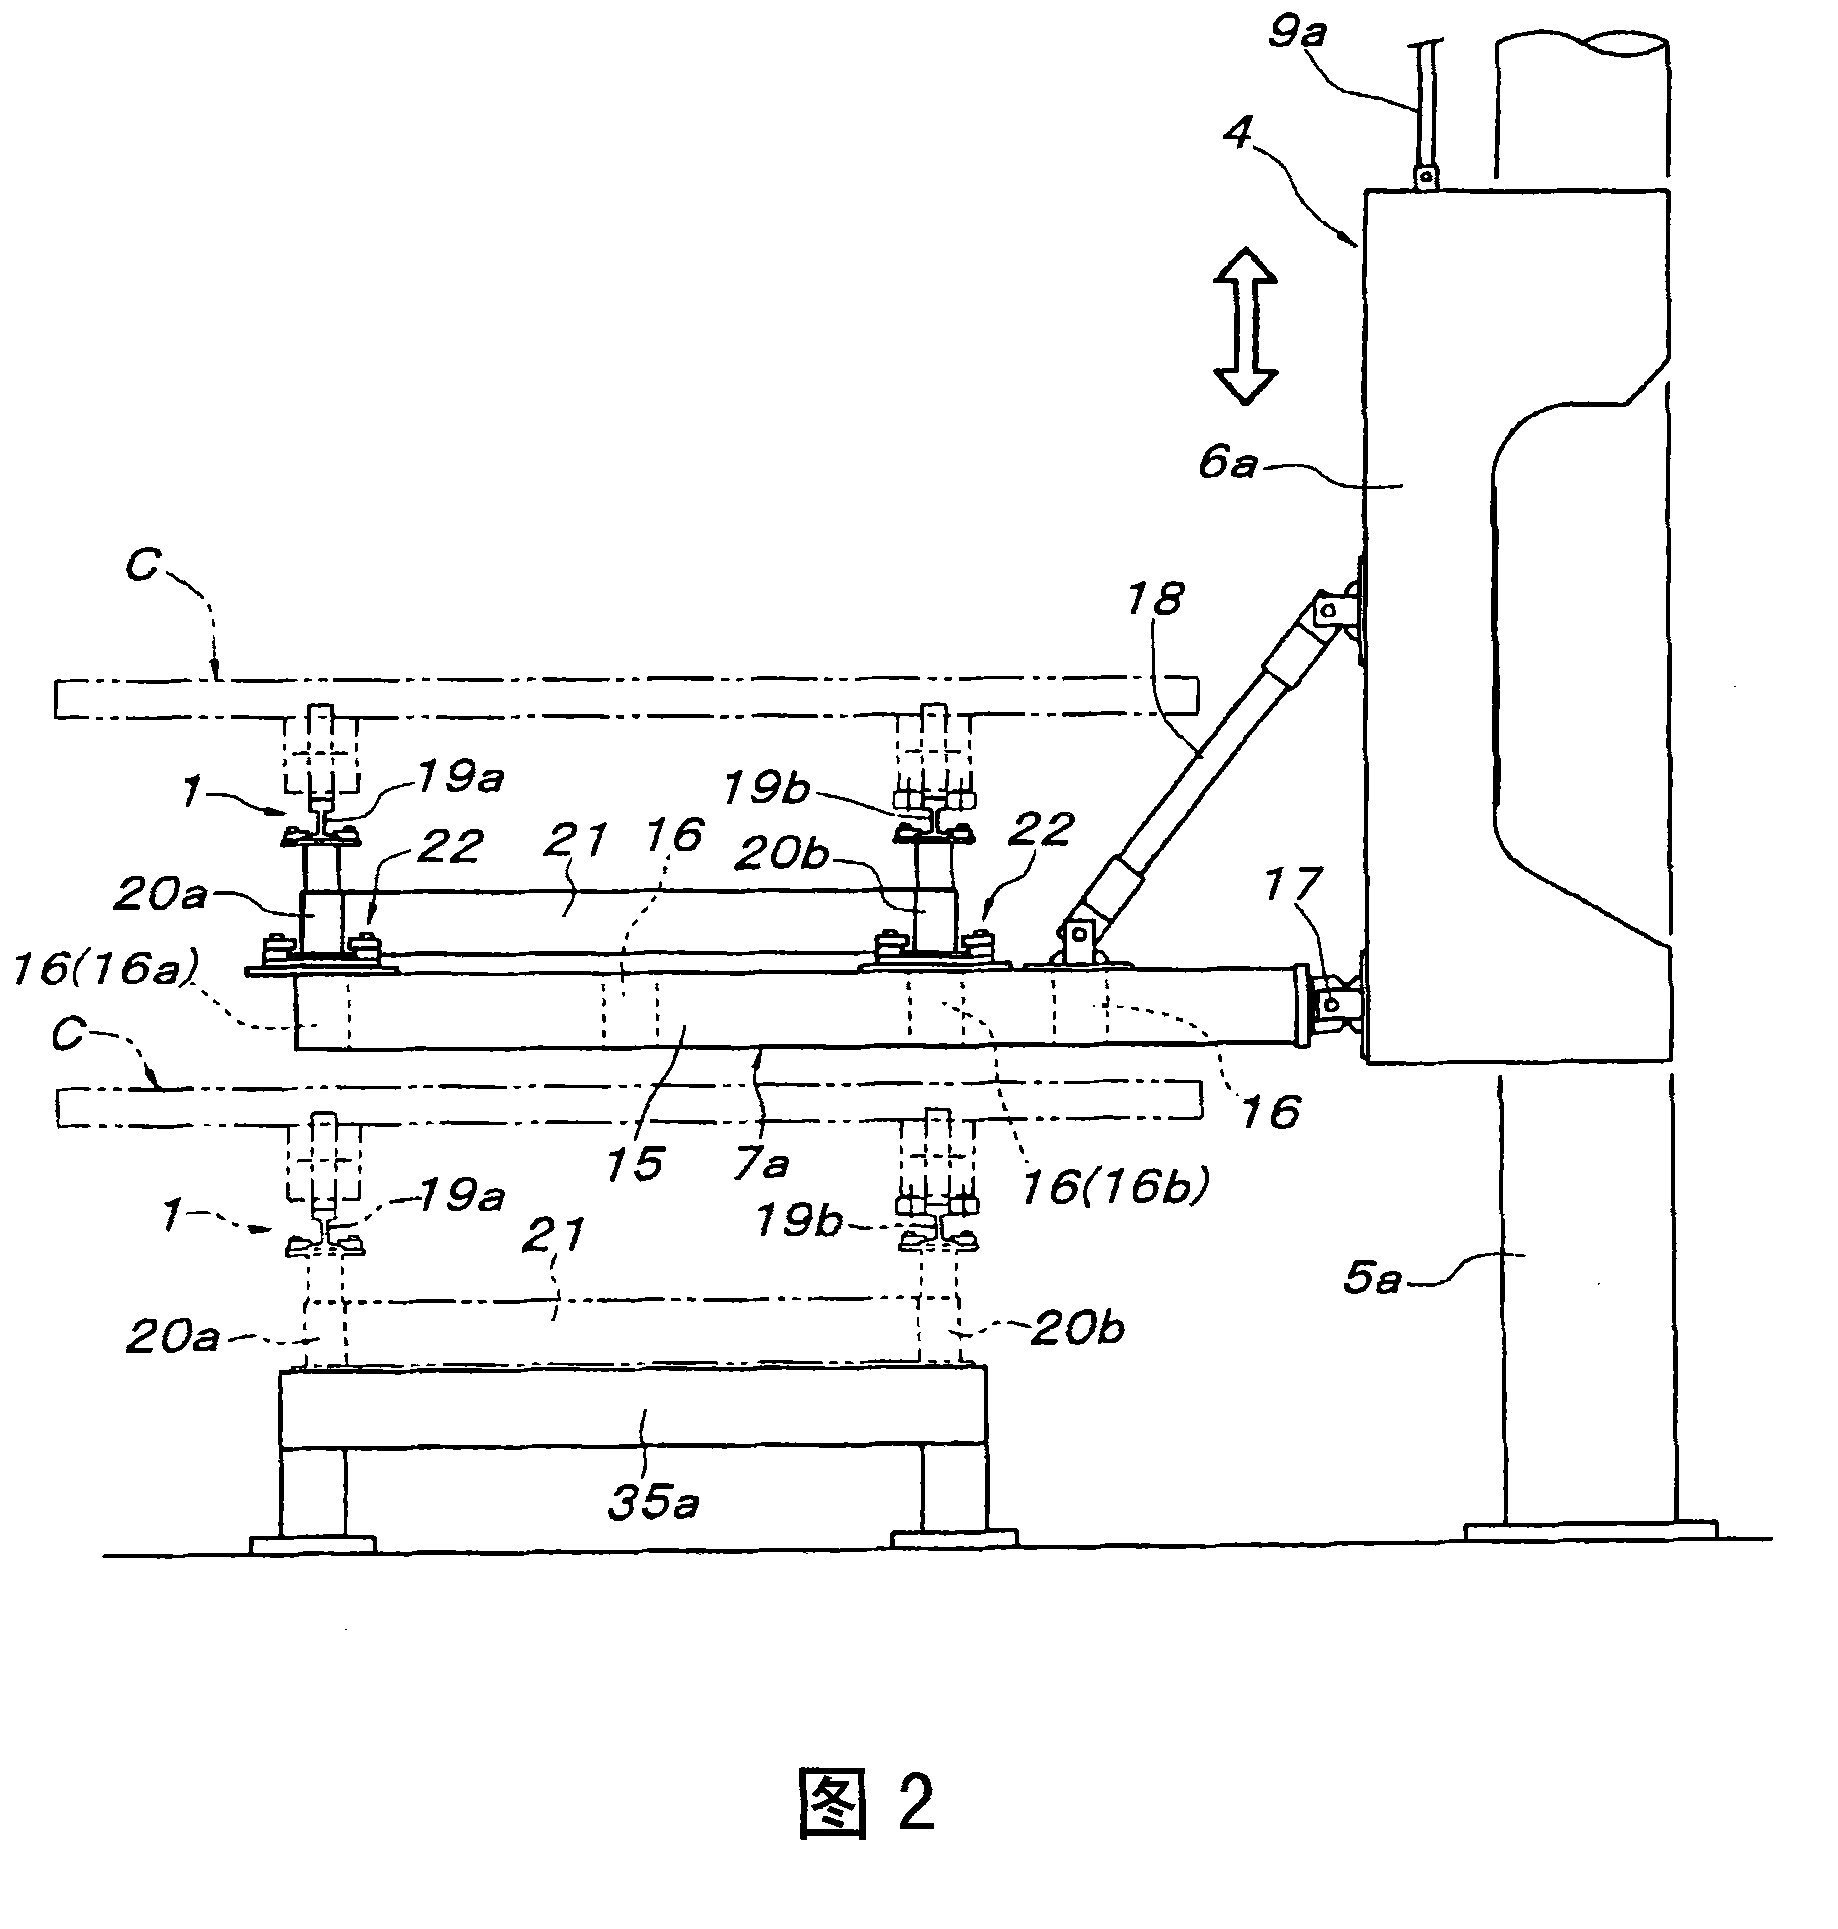 Upper and lower path switching device for traveling body for transportation